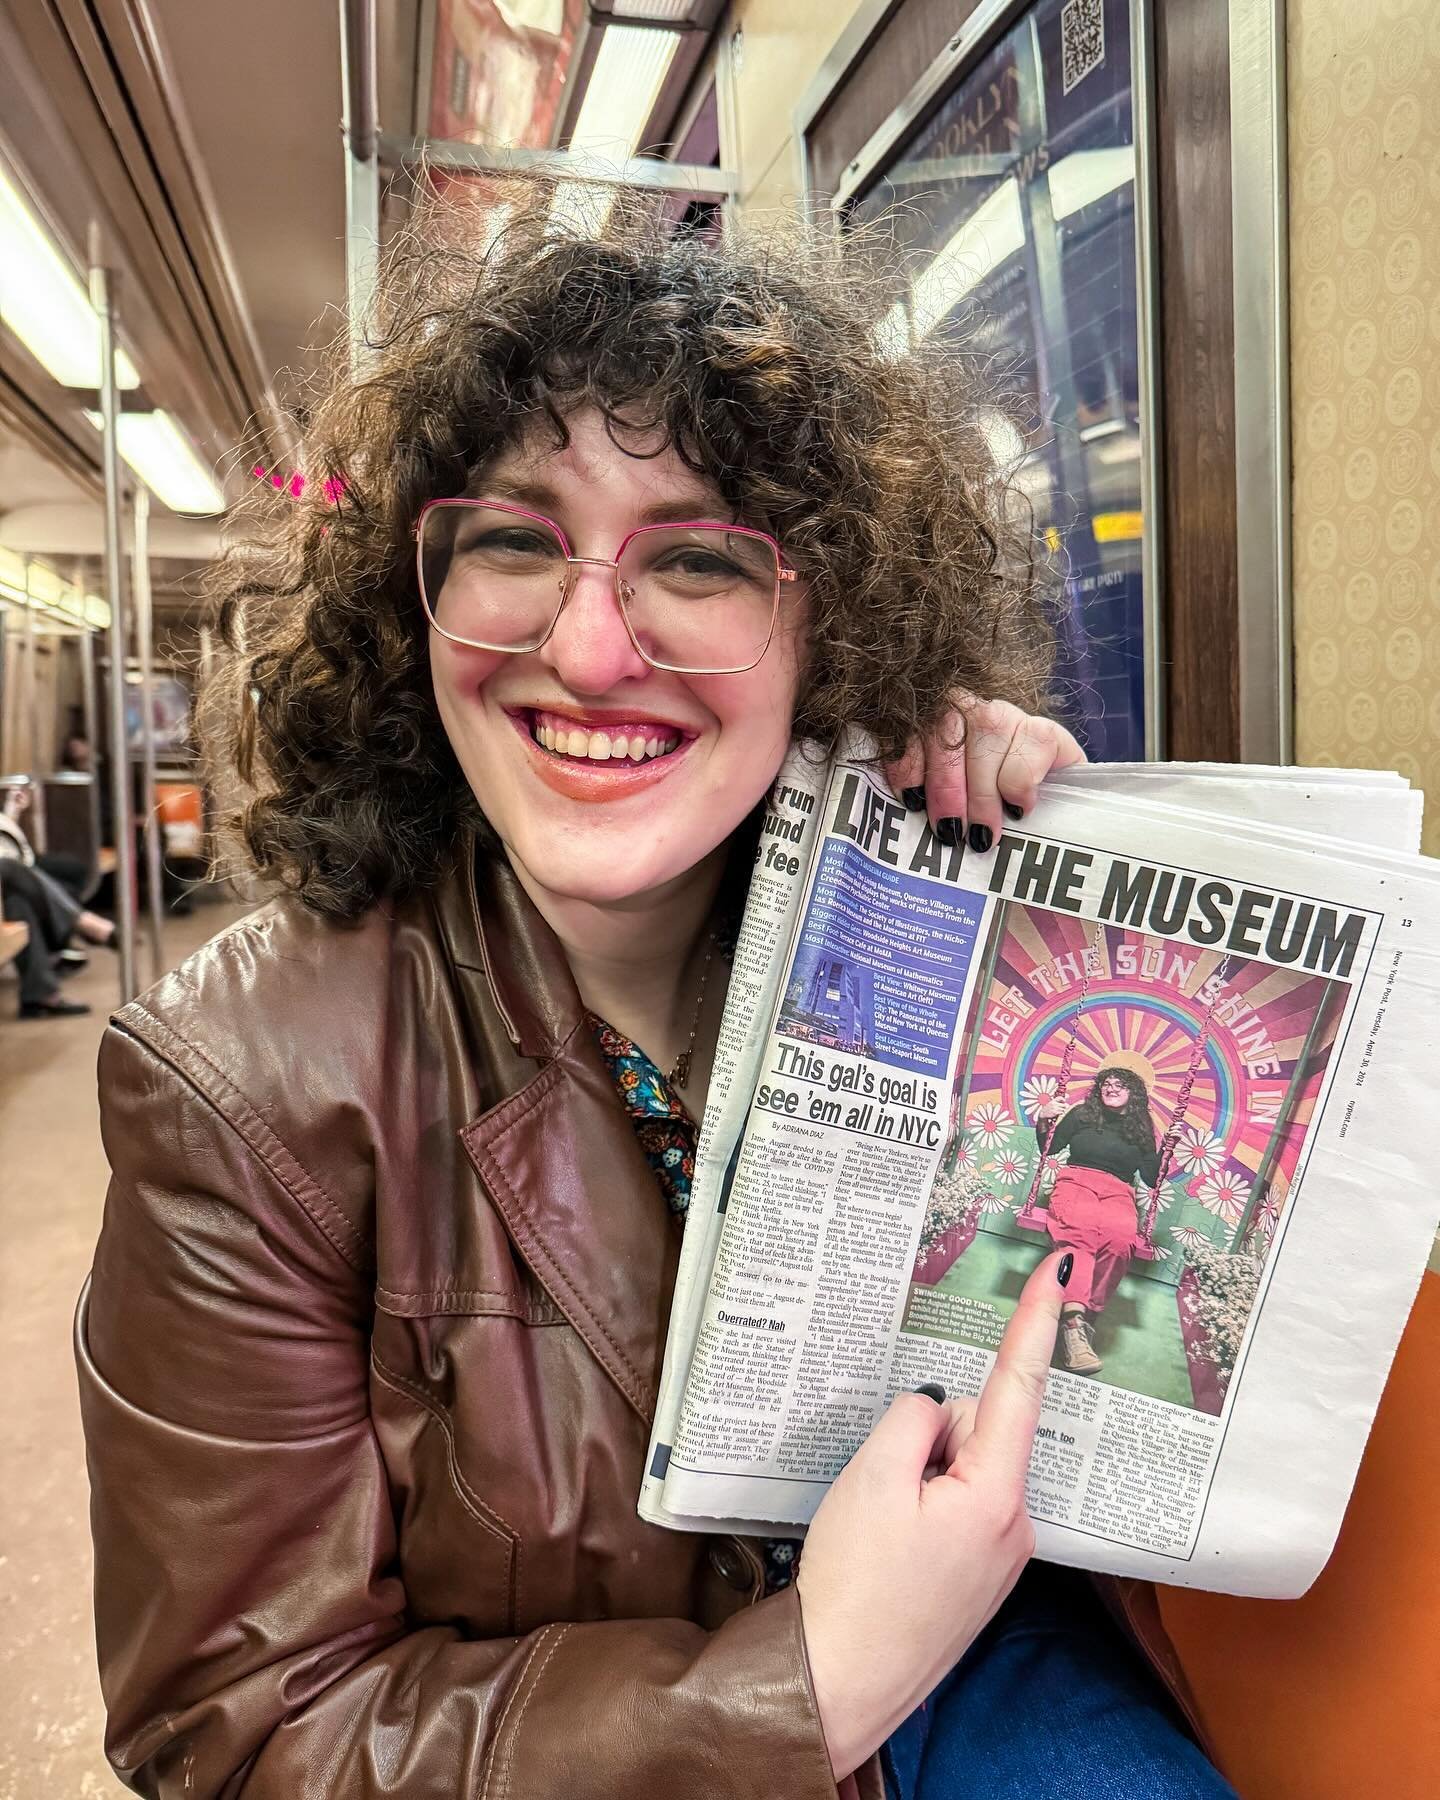 three years ago the new york post reached out and then ghosted me about doing a piece on the museum project. i&rsquo;m thrilled to share that we gave it another try after taking some time to work on ourselves 

jokes aside, i had a lovely time talkin